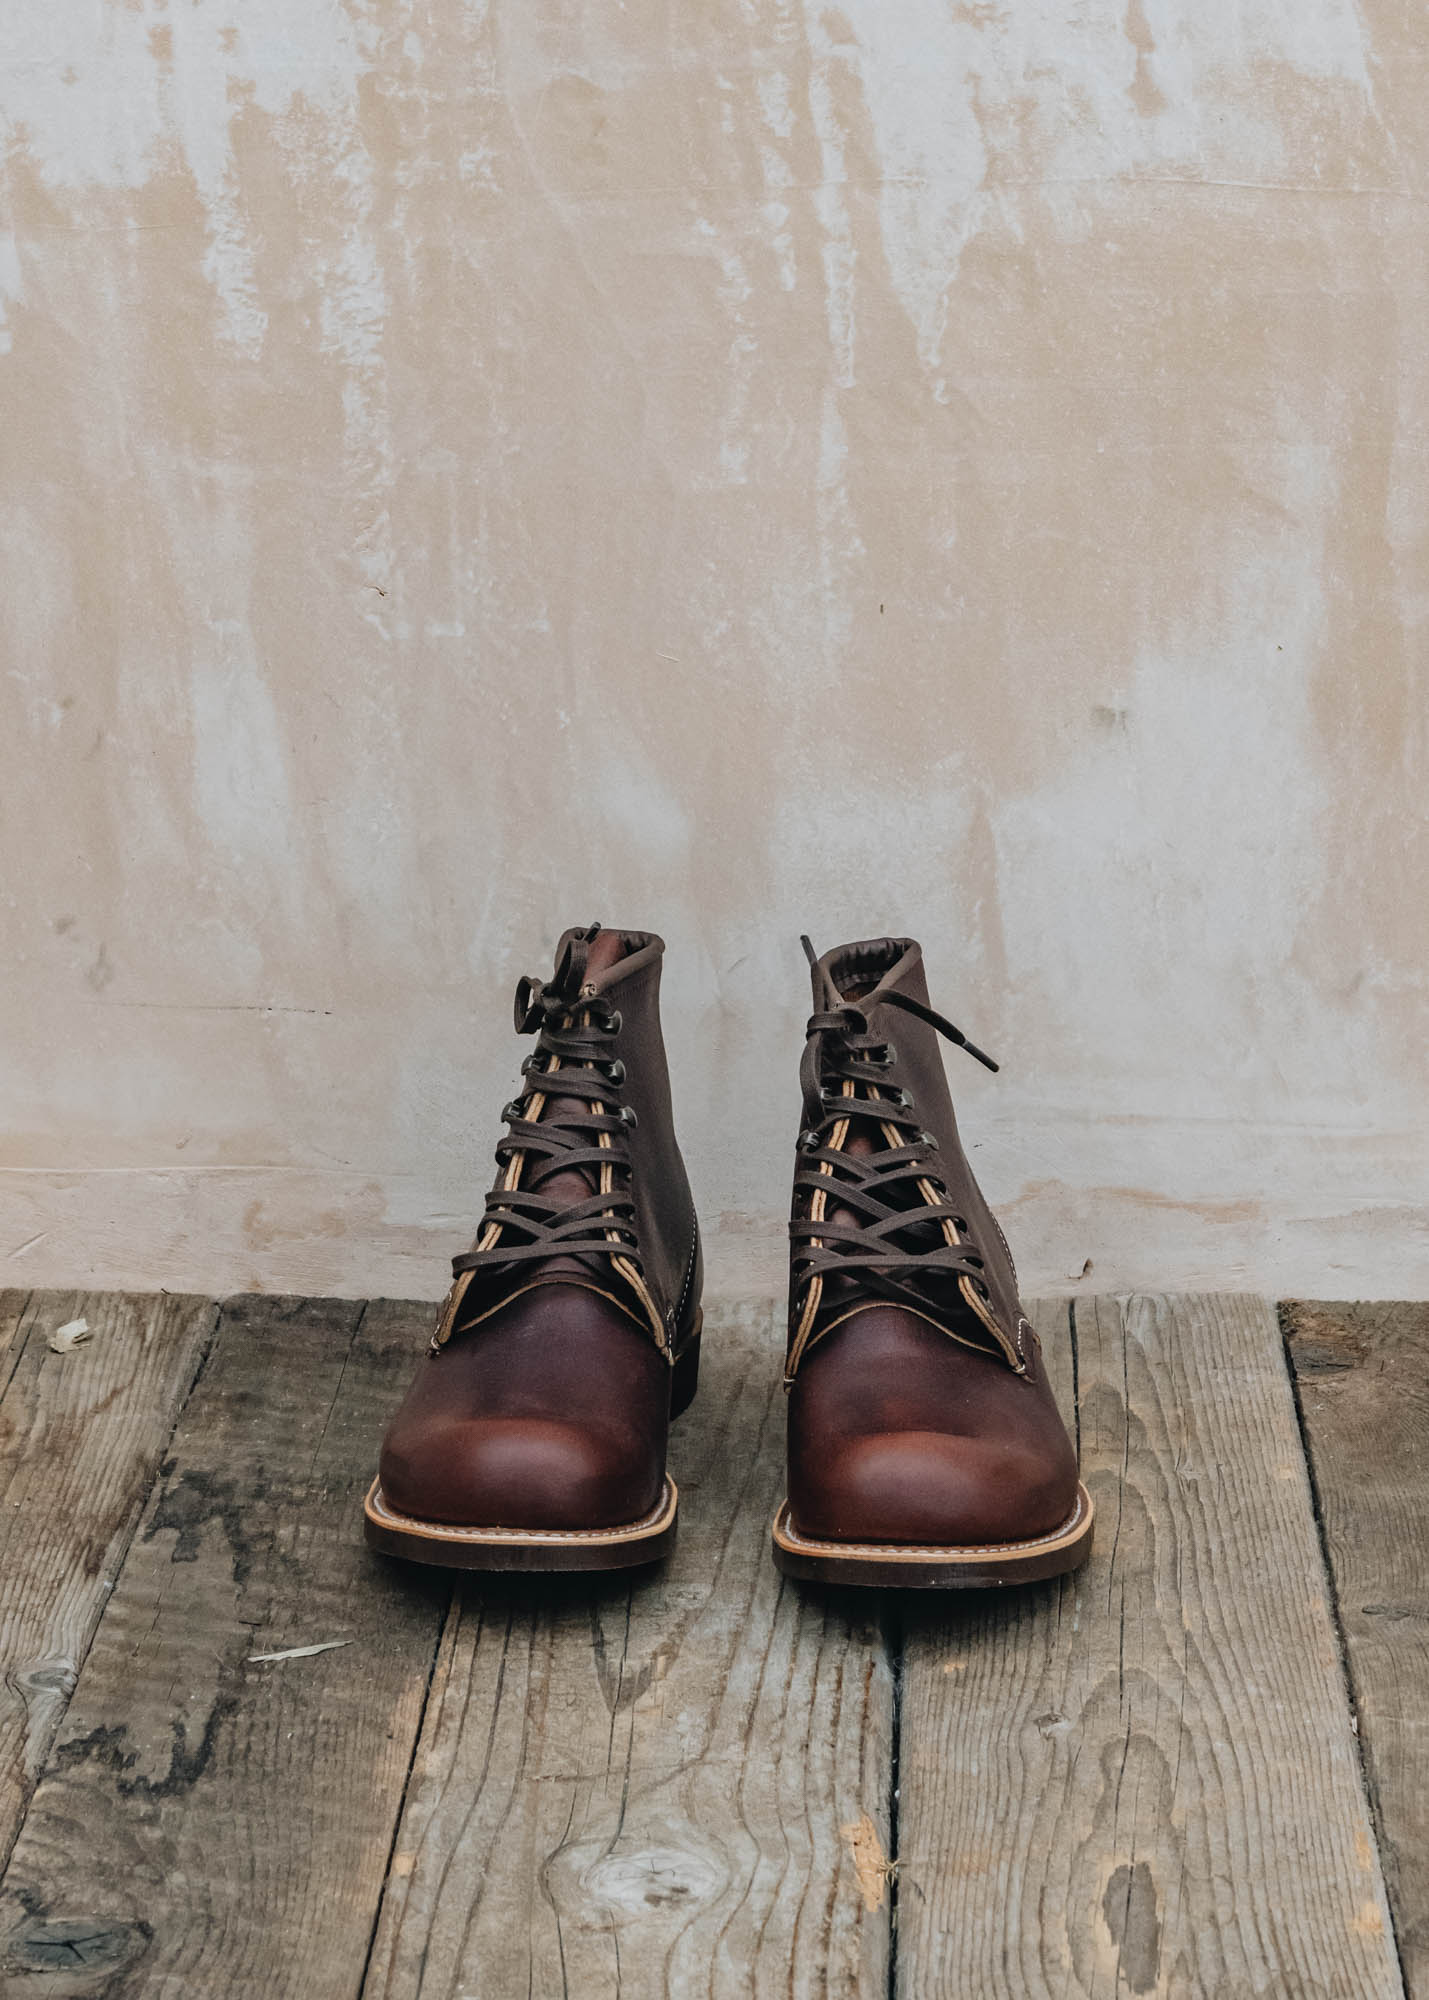 Red Wing 3340 Blacksmith Boots in Briar Oil Slick